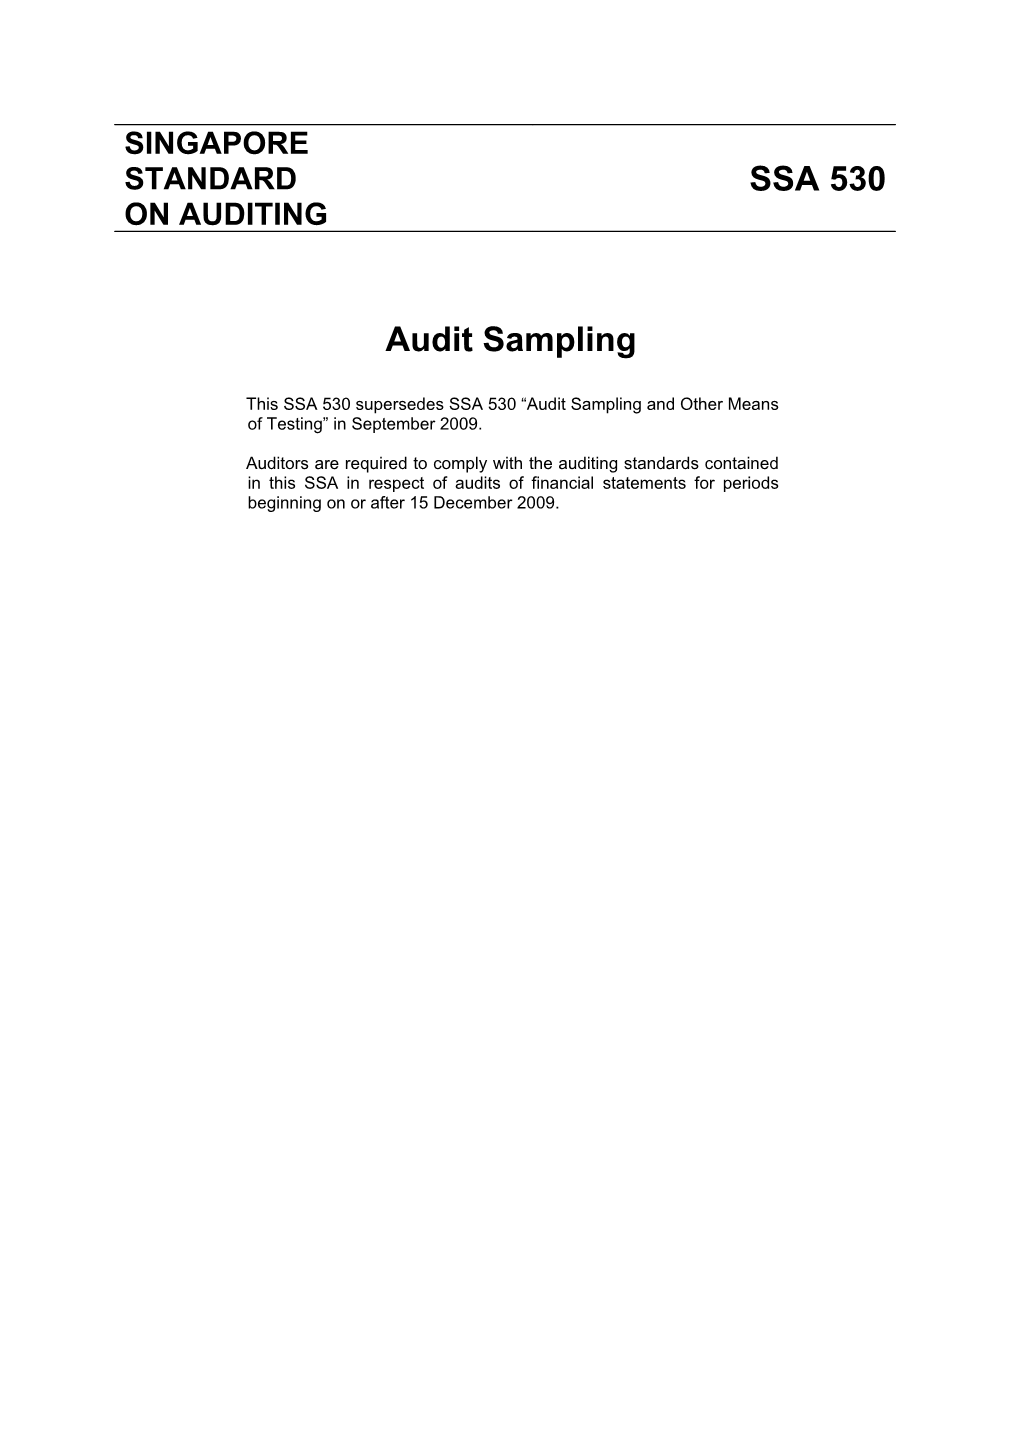 This SSA 530 Supersedes SSA 530 Audit Sampling and Other Means of Testing Inseptember 2009